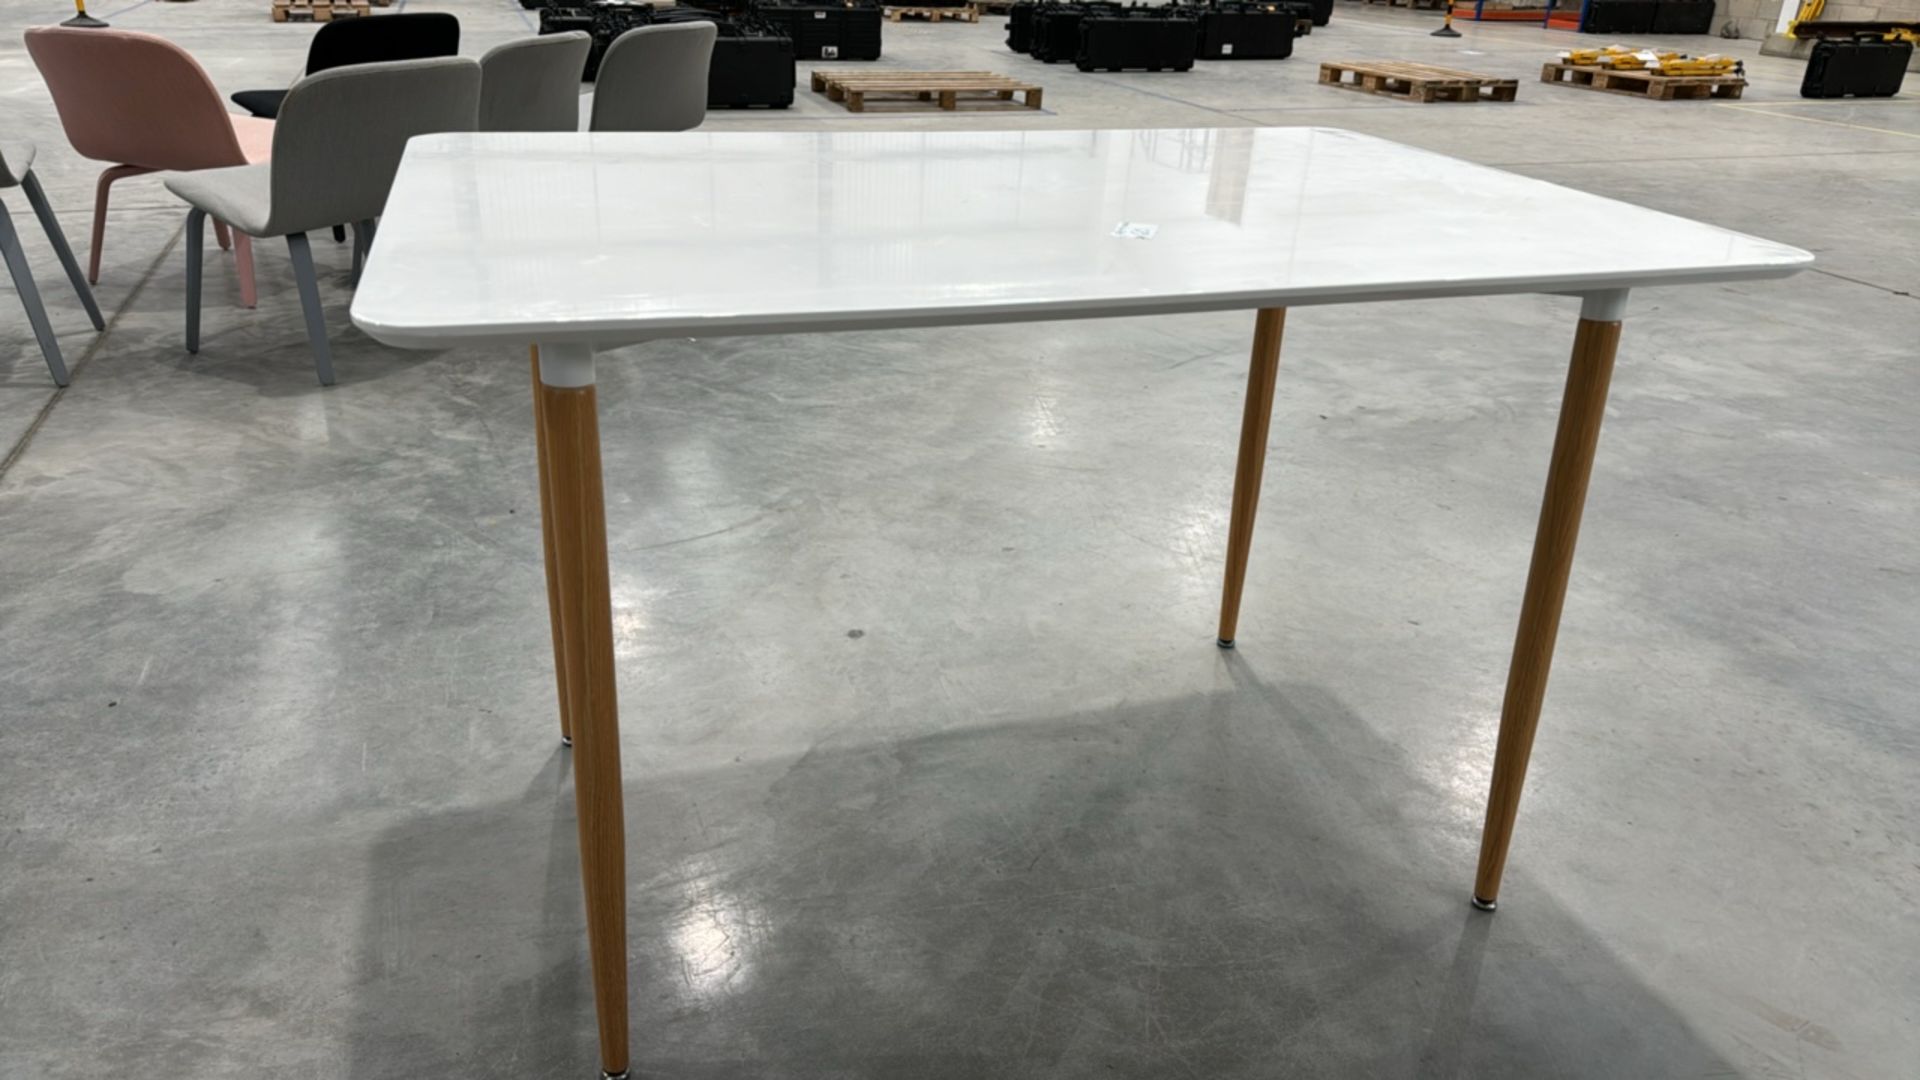 White Gloss Table With Wooden Legs - Image 4 of 4